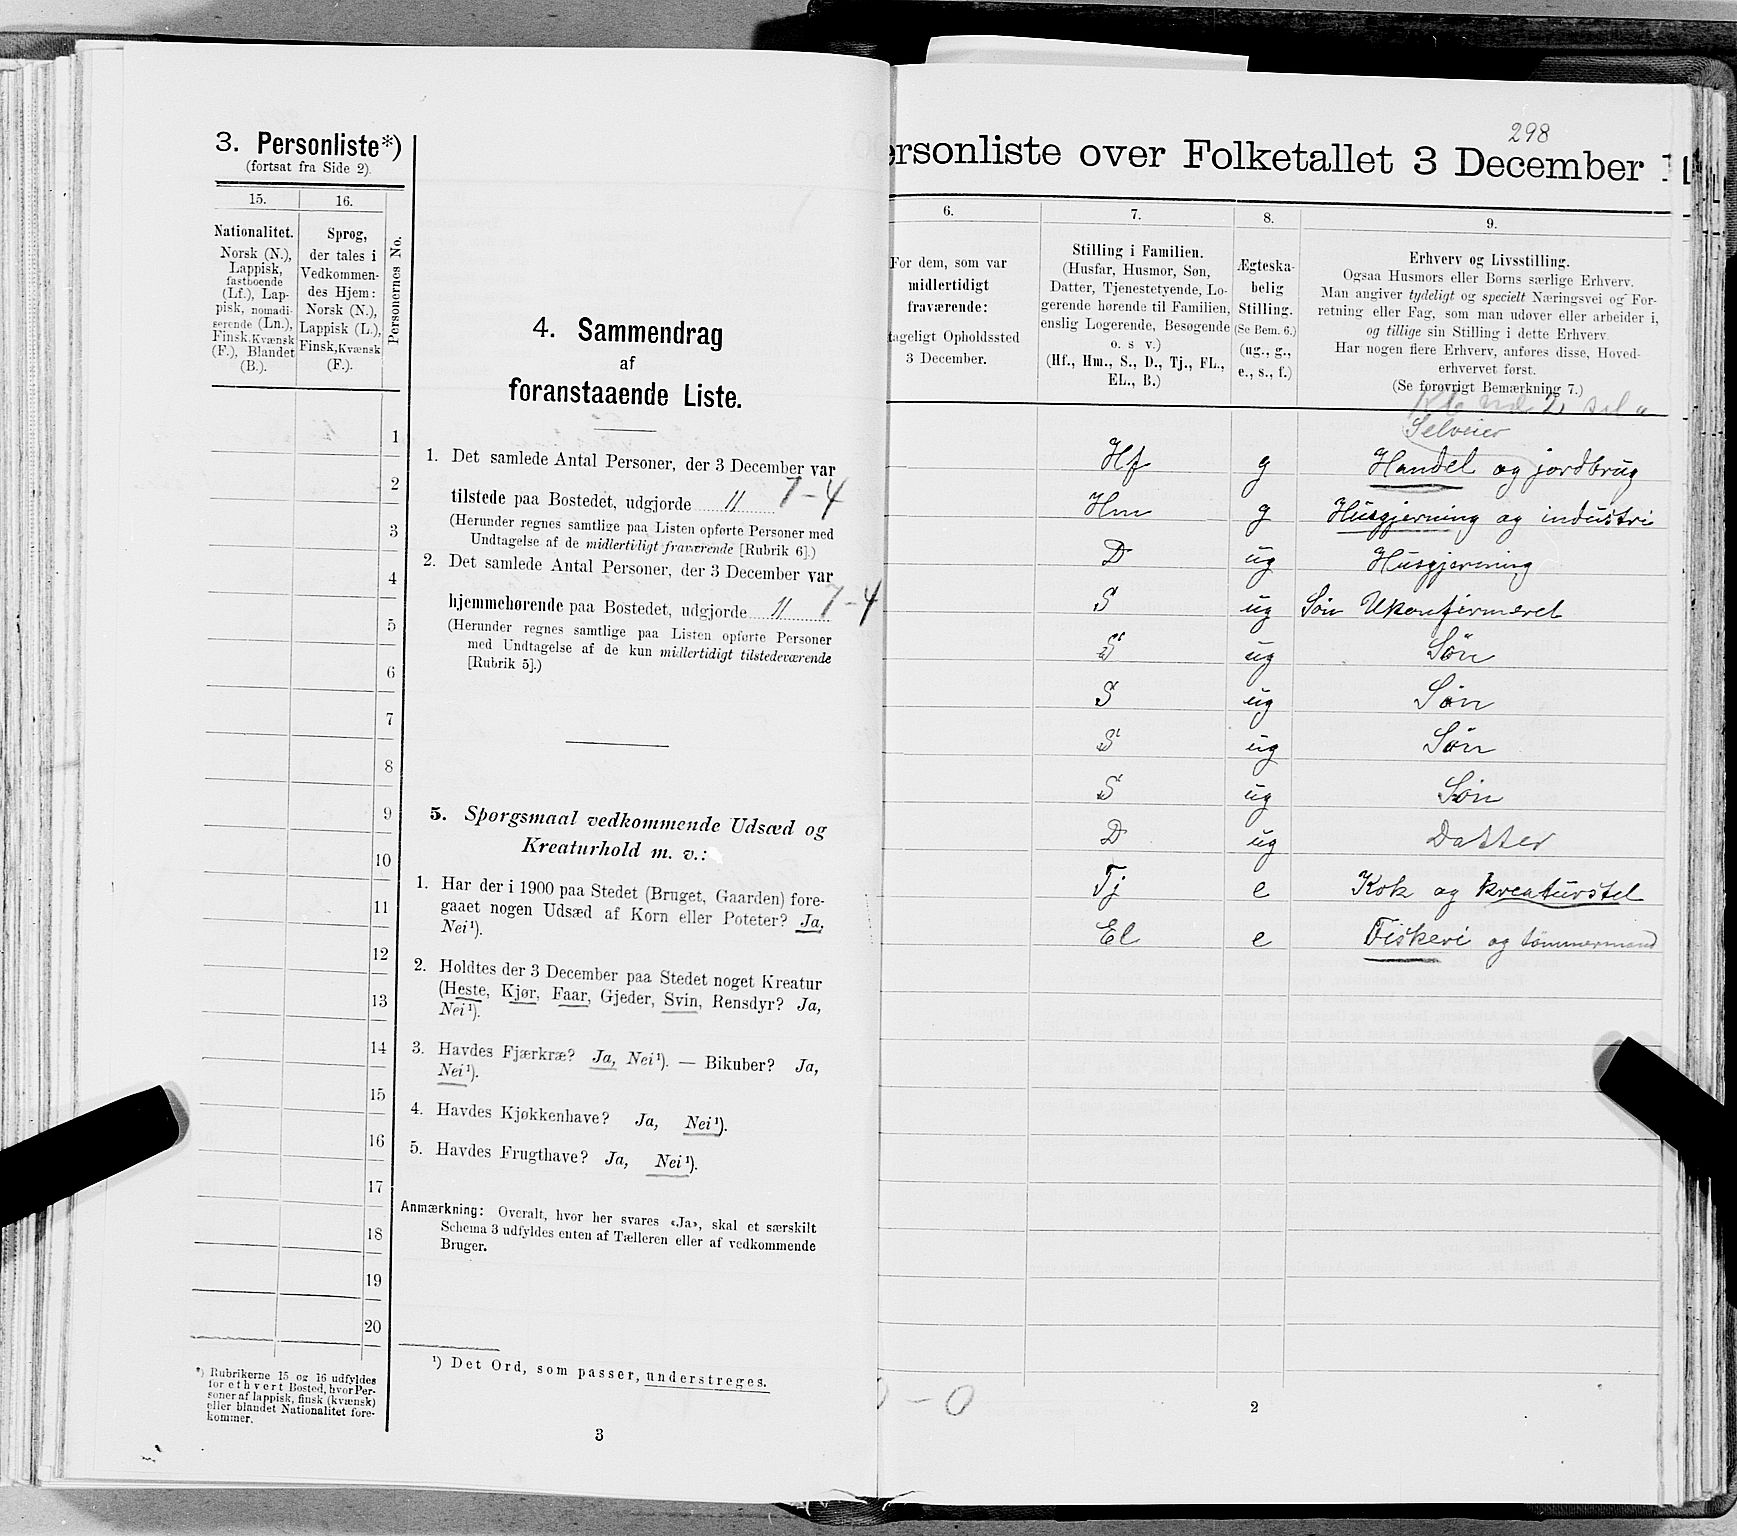 SAT, 1900 census for Meløy, 1900, p. 1384